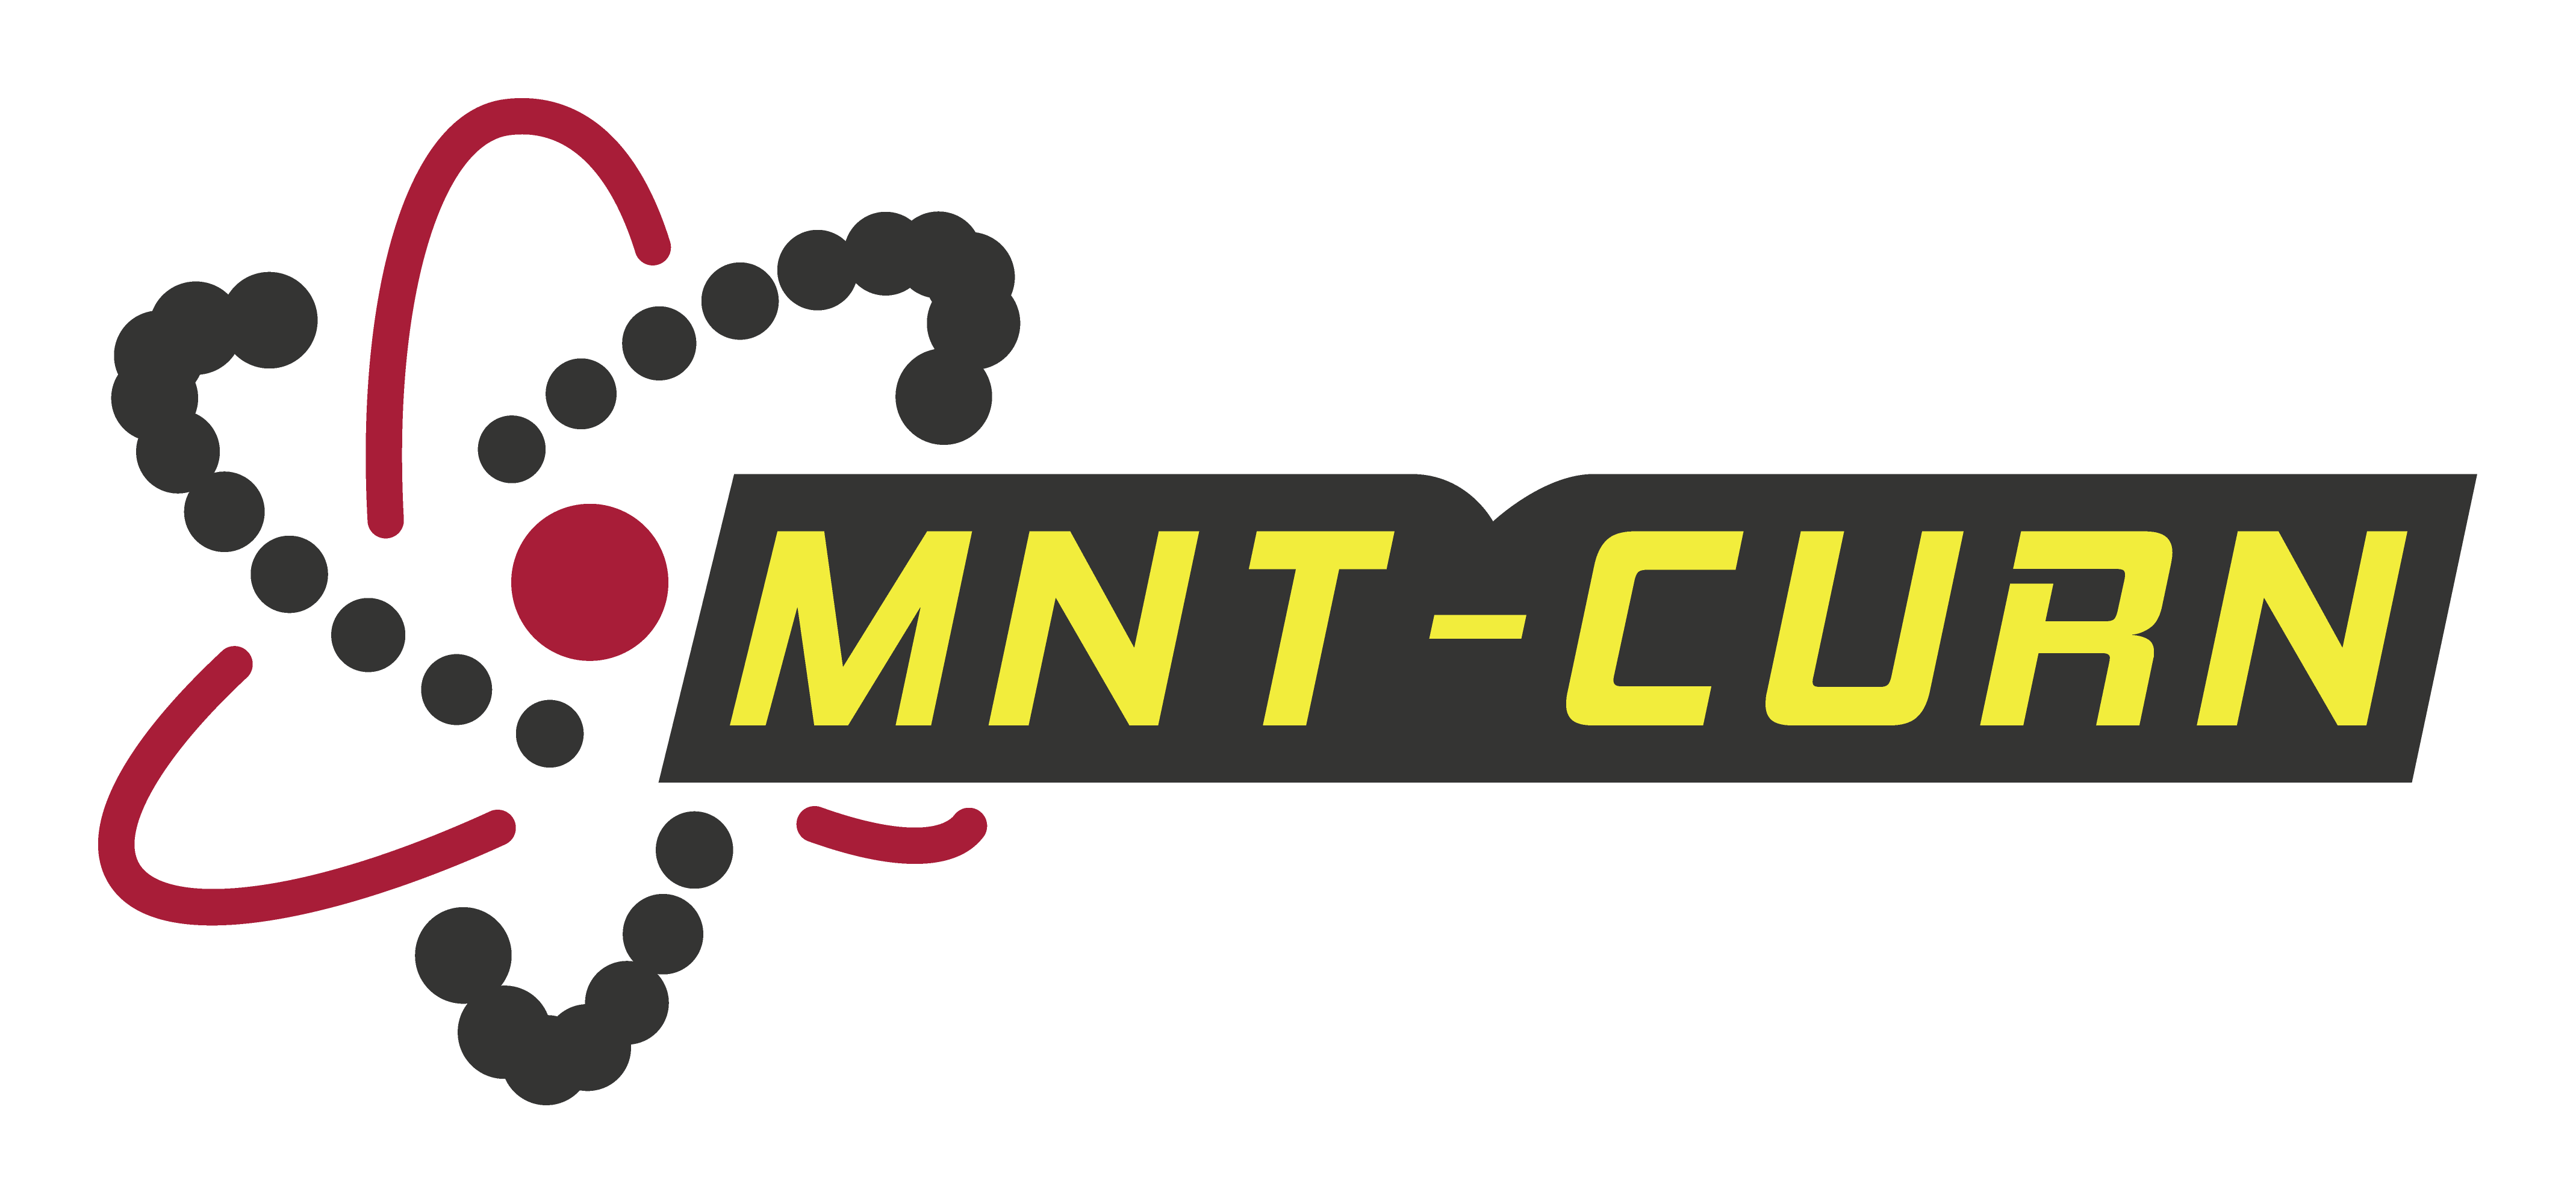 MNT-CURN 2022-23 group image